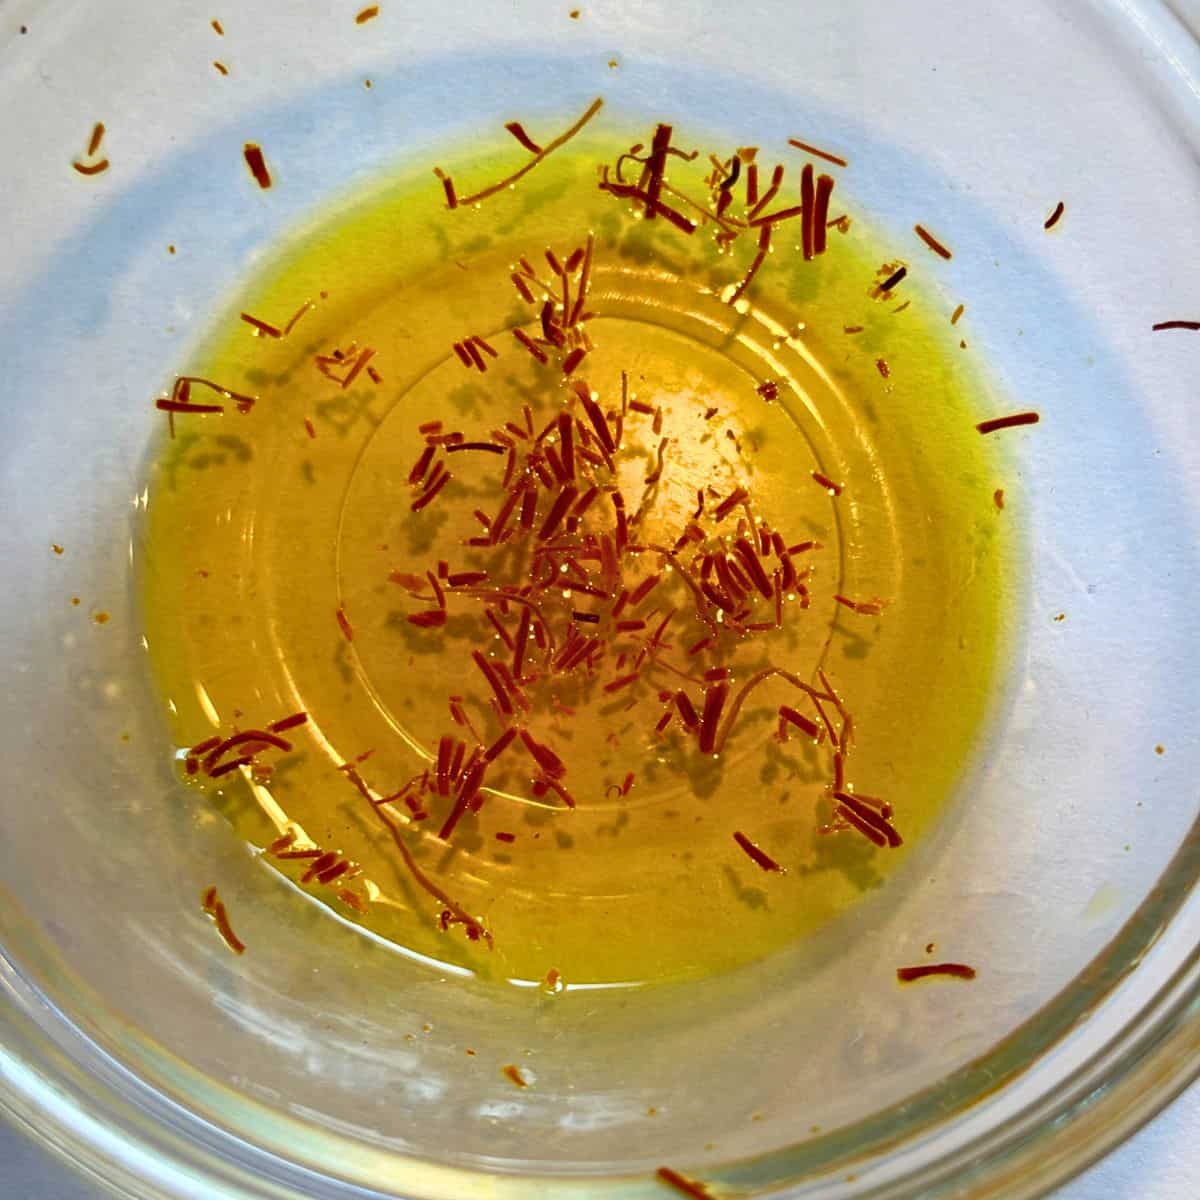 Blooming saffron in water in small glass bowl.